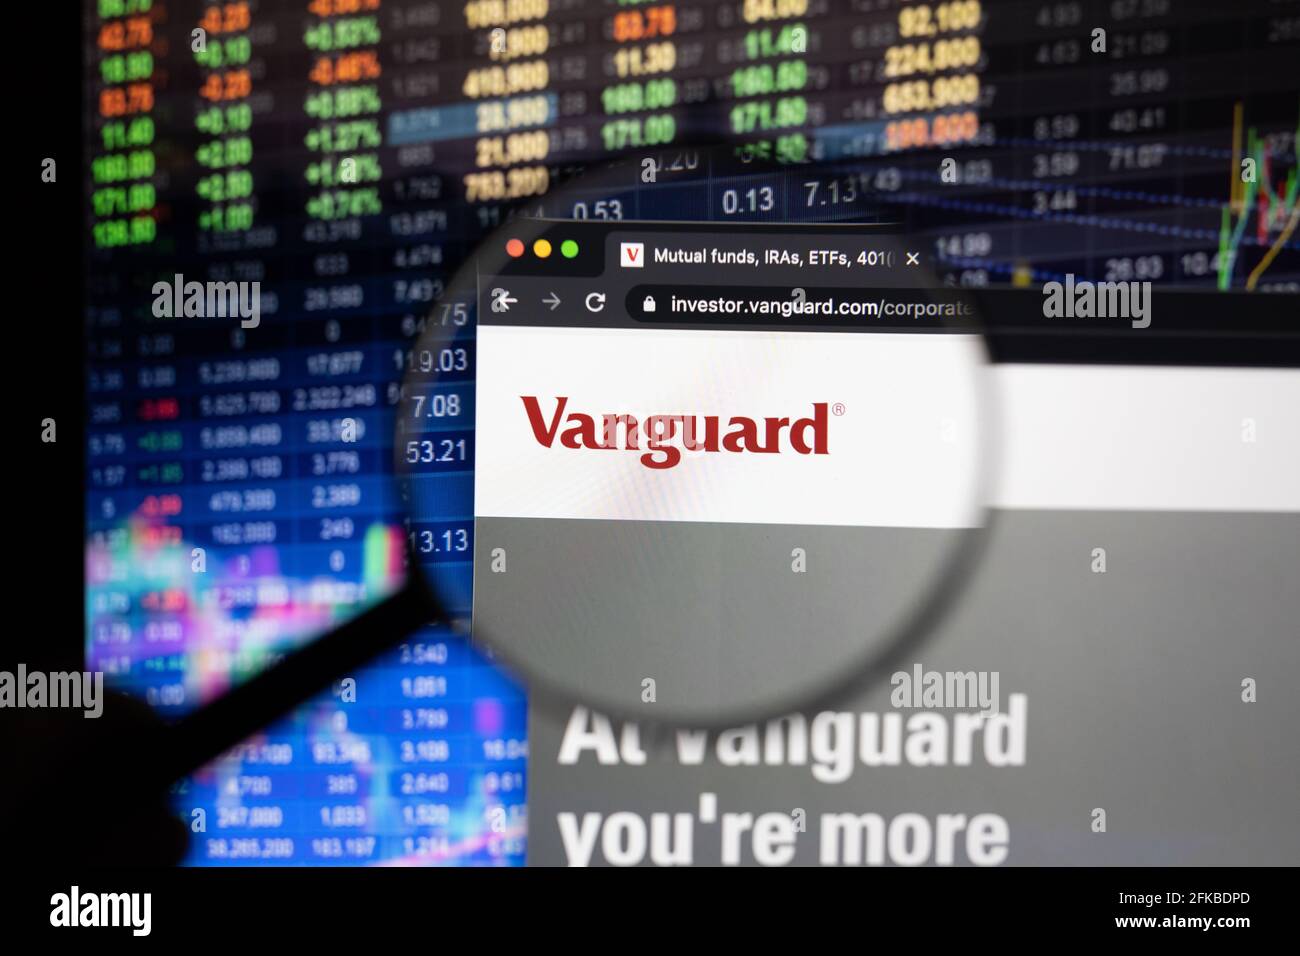 Vanguard company logo on a website with blurry stock market developments in the background, seen on a computer screen through a magnifying glass Stock Photo